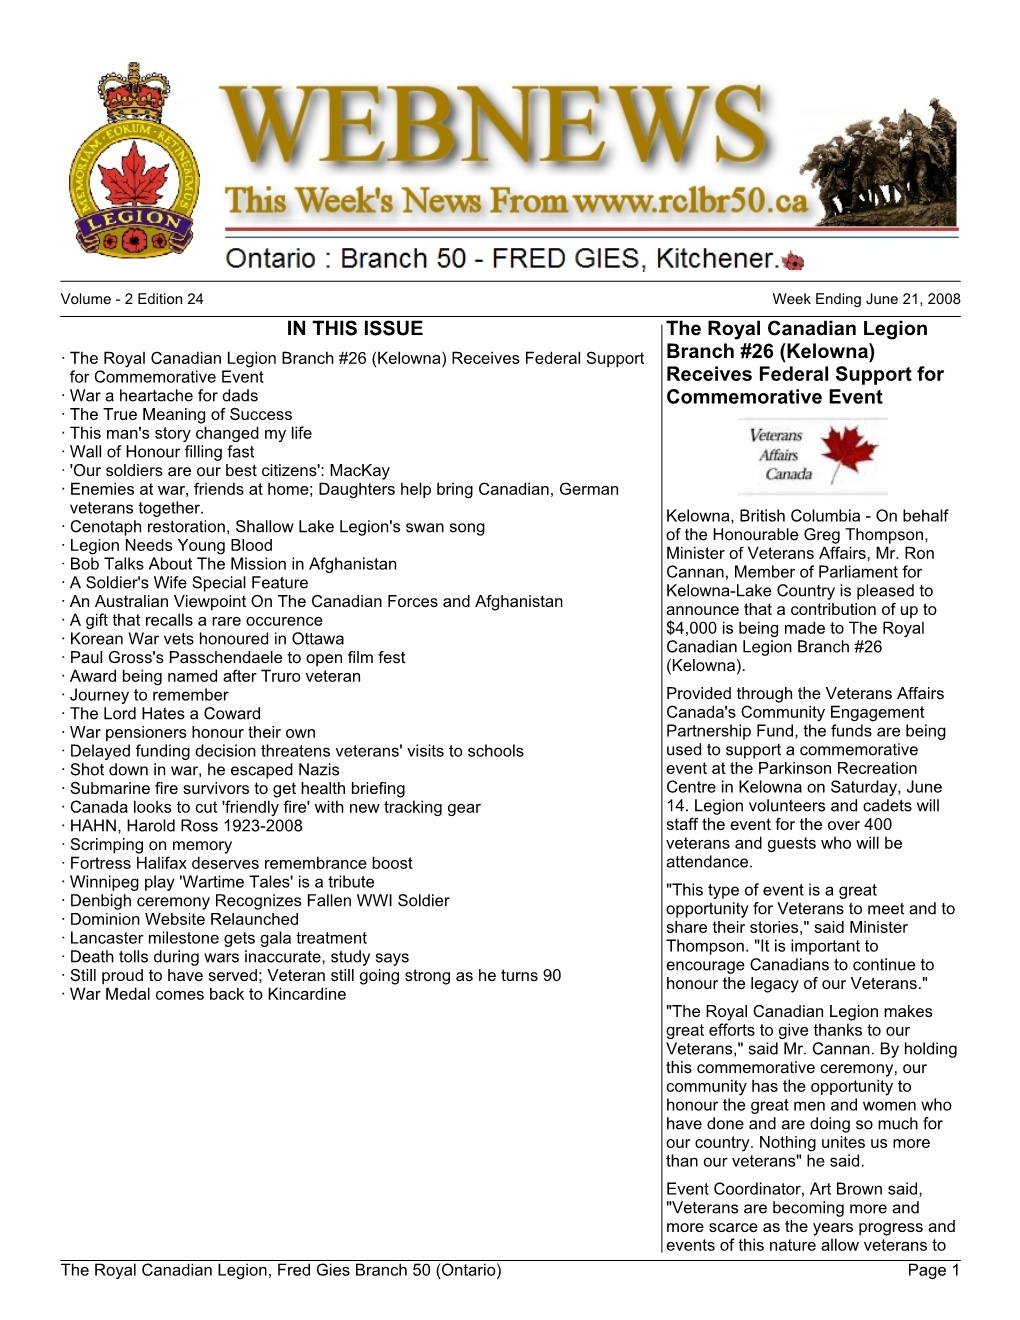 IN THIS ISSUE the Royal Canadian Legion Branch #26 (Kelowna